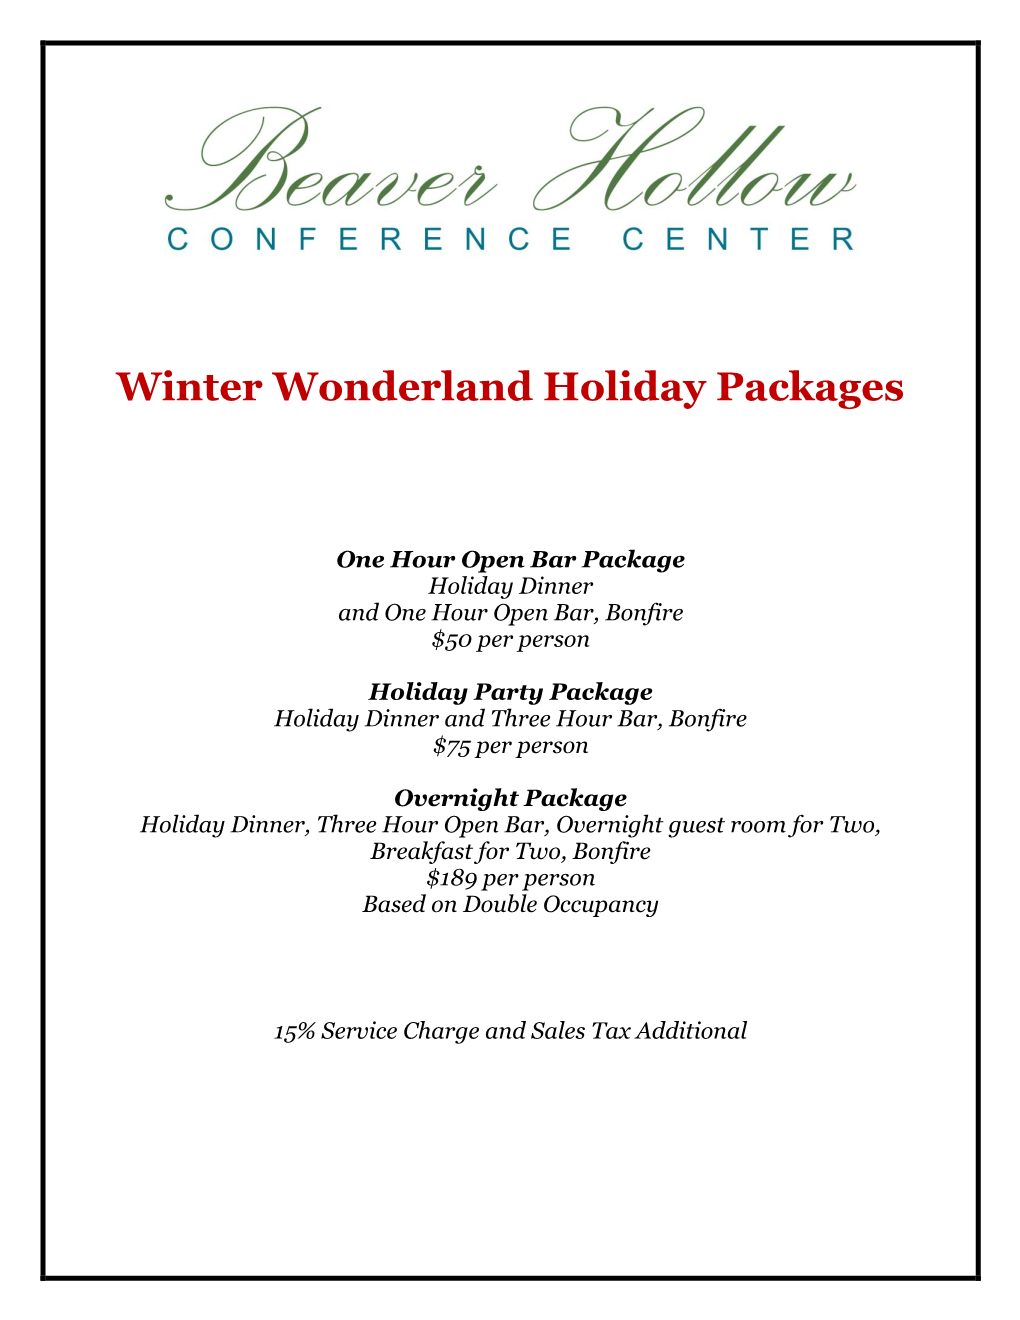 Winter Wonderland Holiday Packages